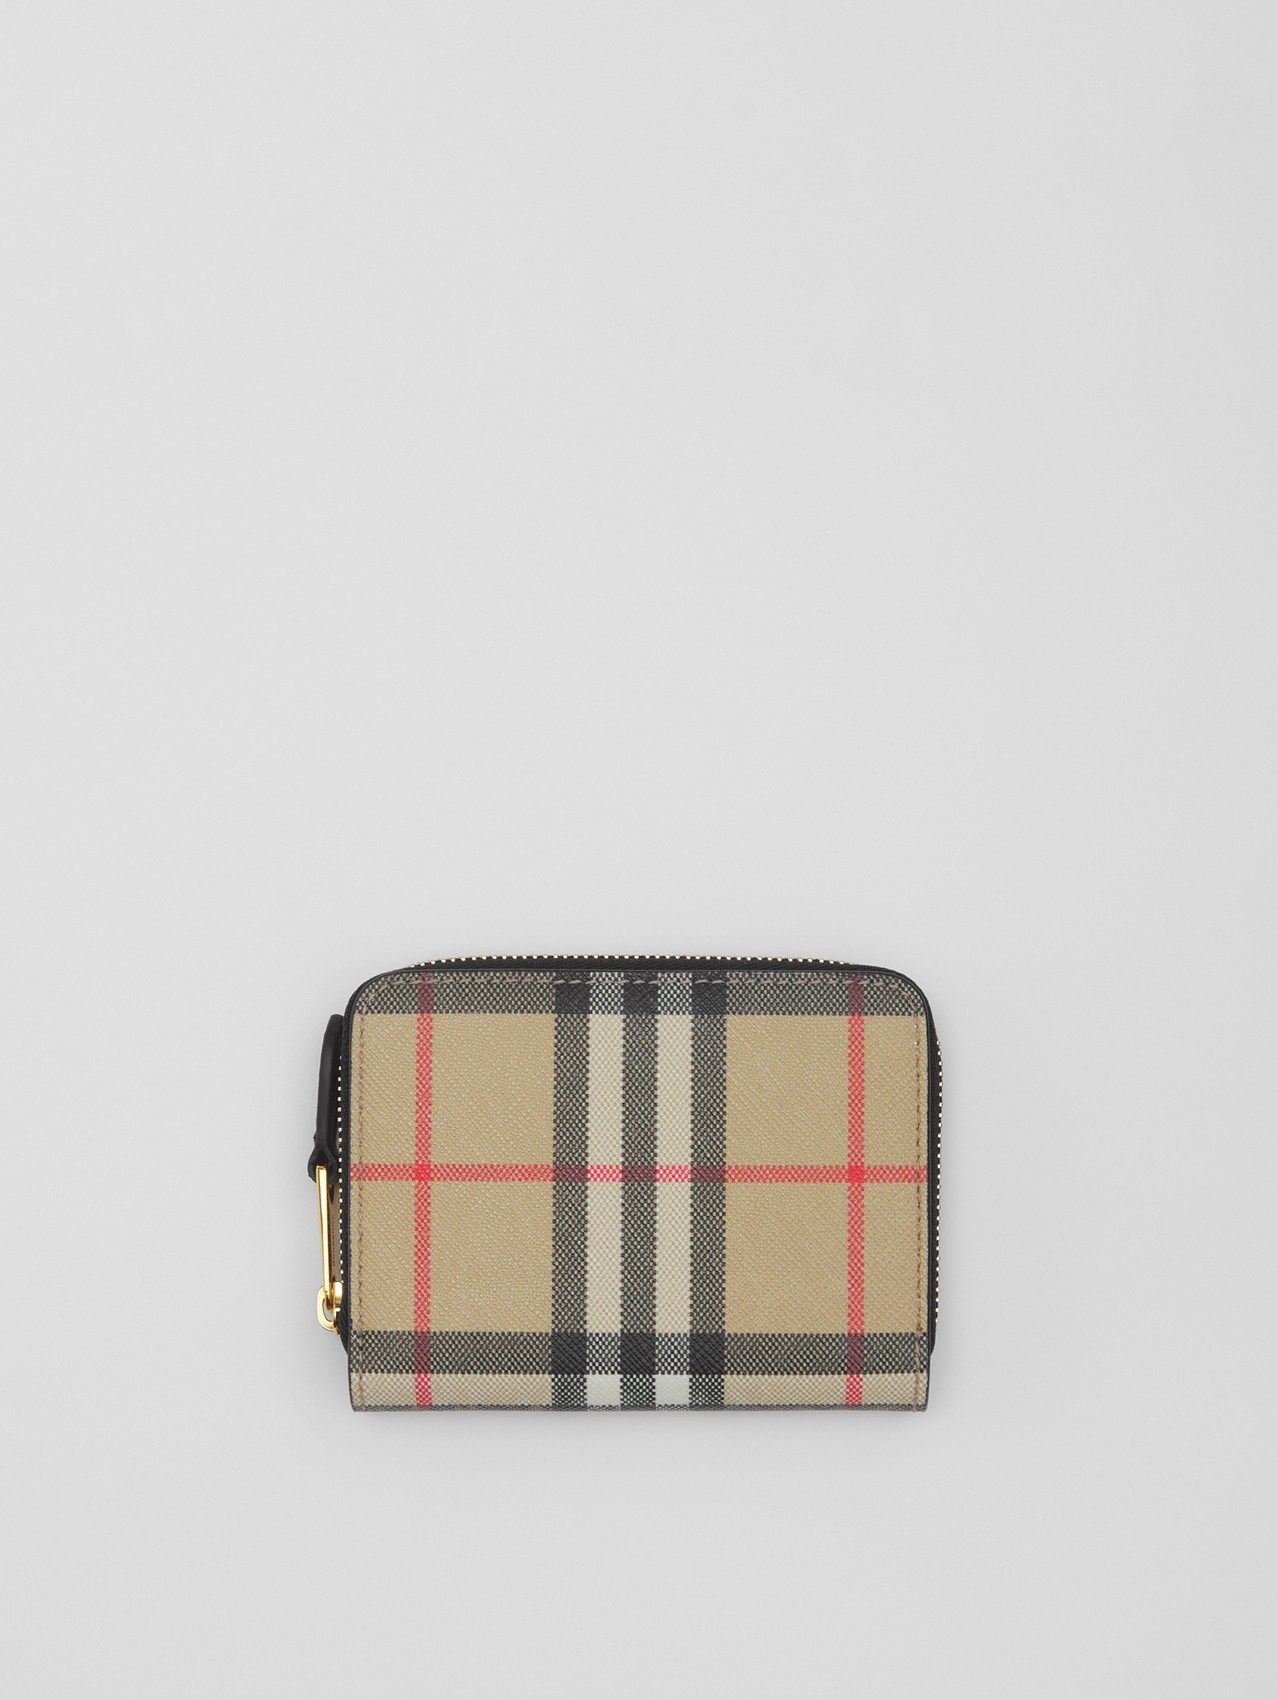 Vintage Check and Leather Zip Wallet in Archive Beige/black